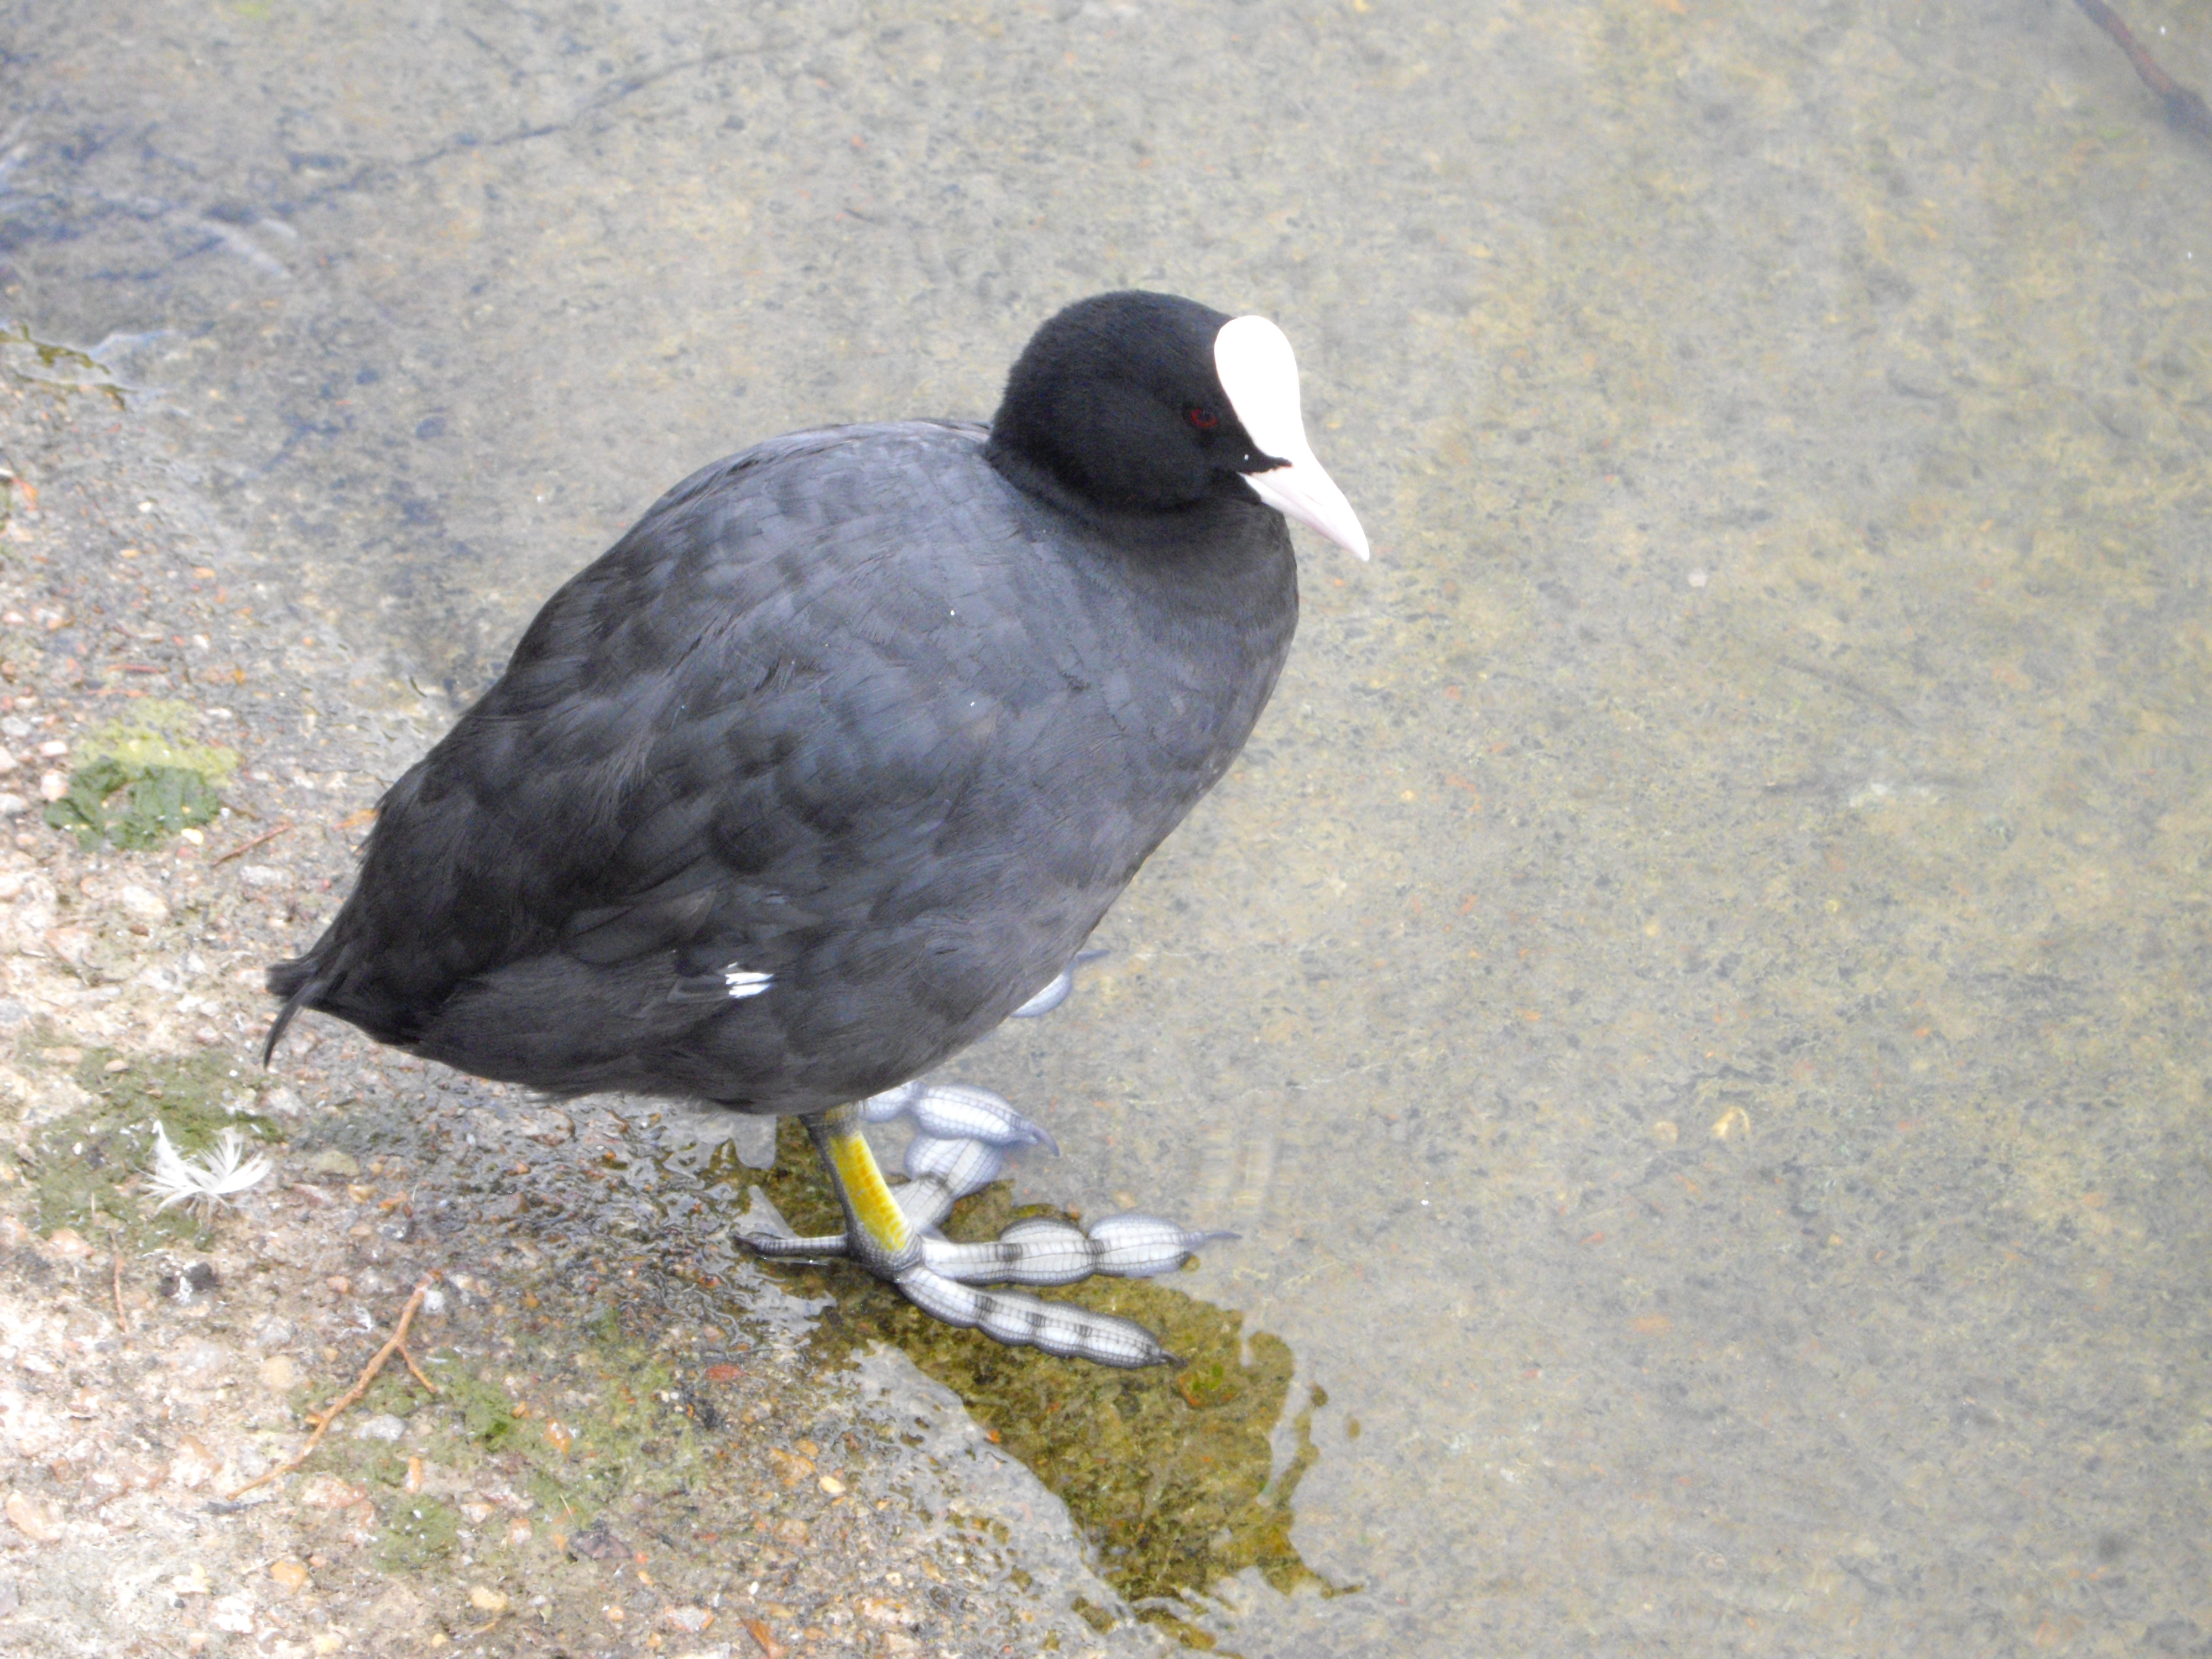 Crazy old coot at St. James Park!  Look at his feet!